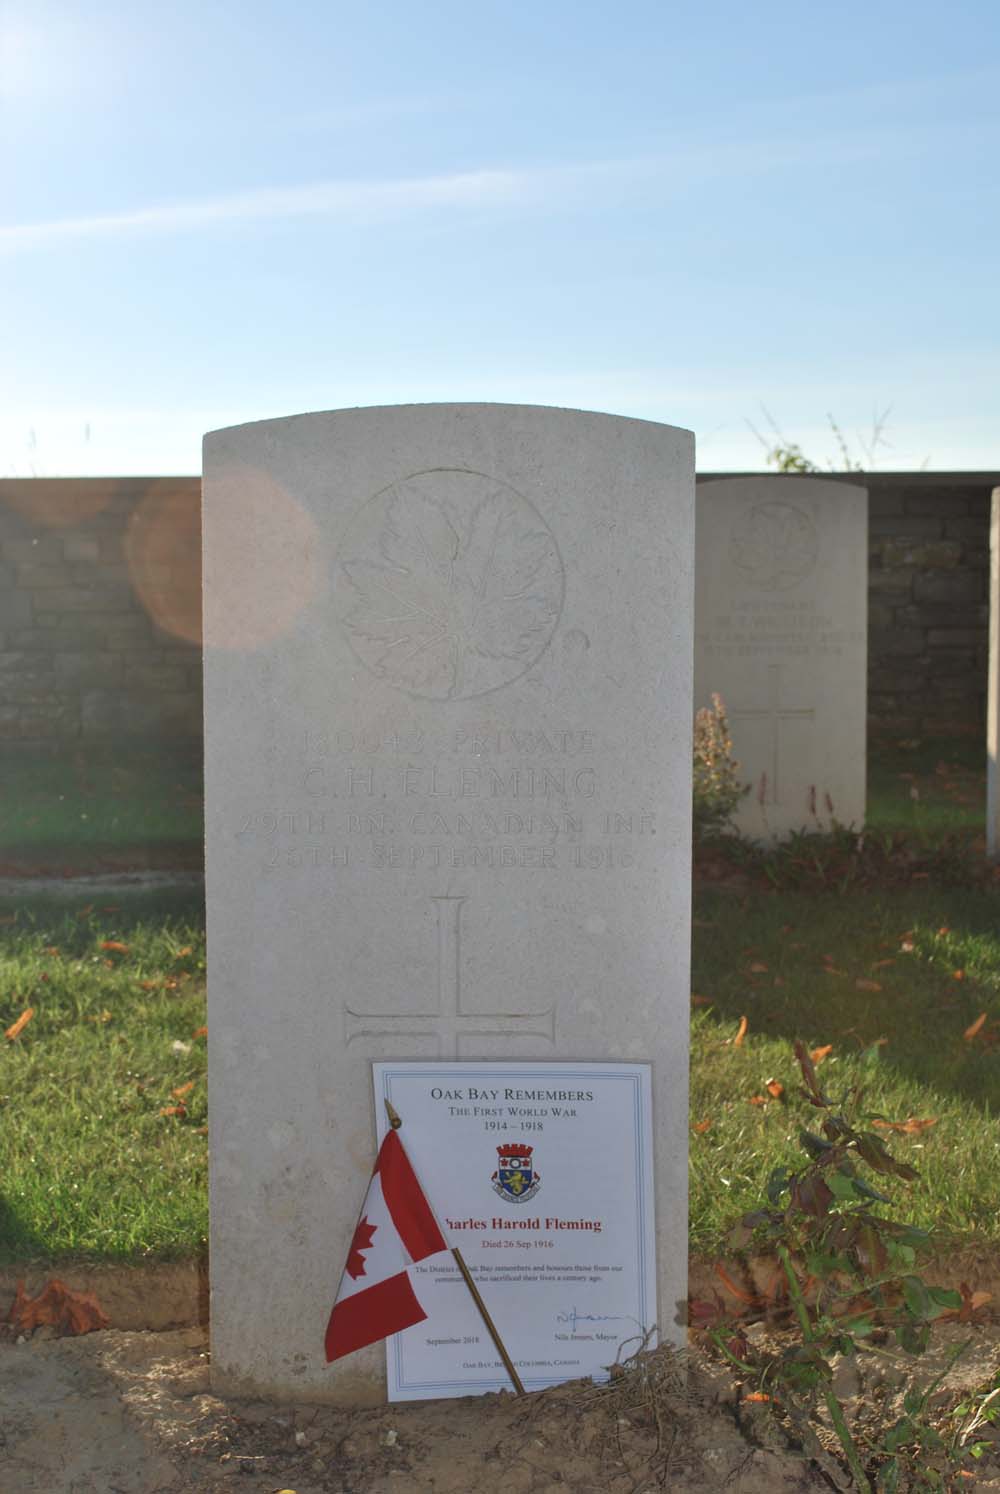 Memorial to Private Charles Harold Fleming, Courcelette British Cemetery, France (Photo: C. Duncan, 2018)